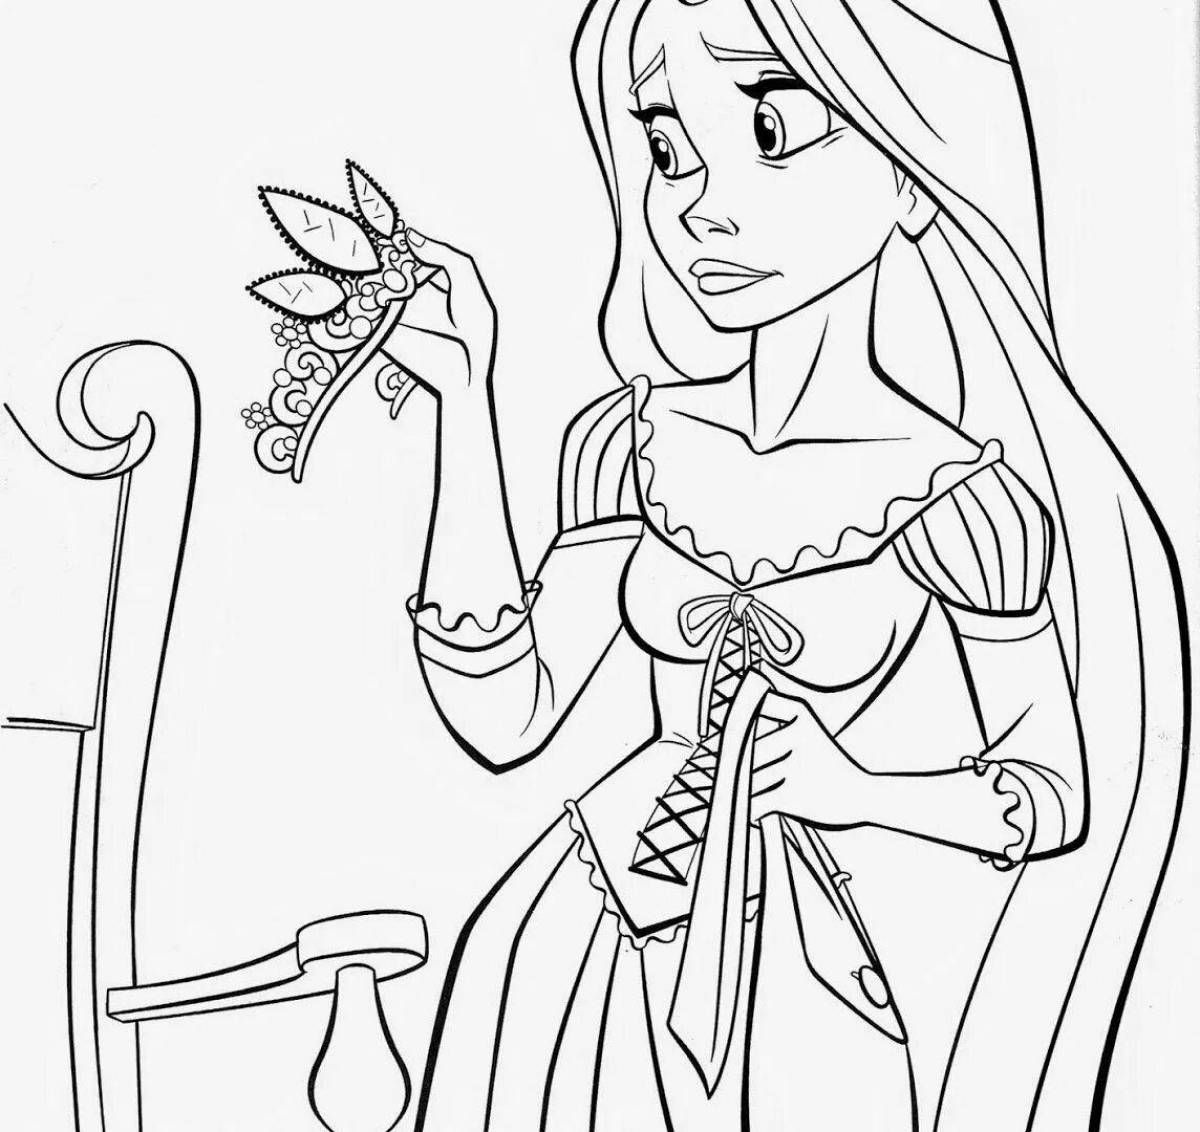 Rapunzel's dazzling coloring book with clothes